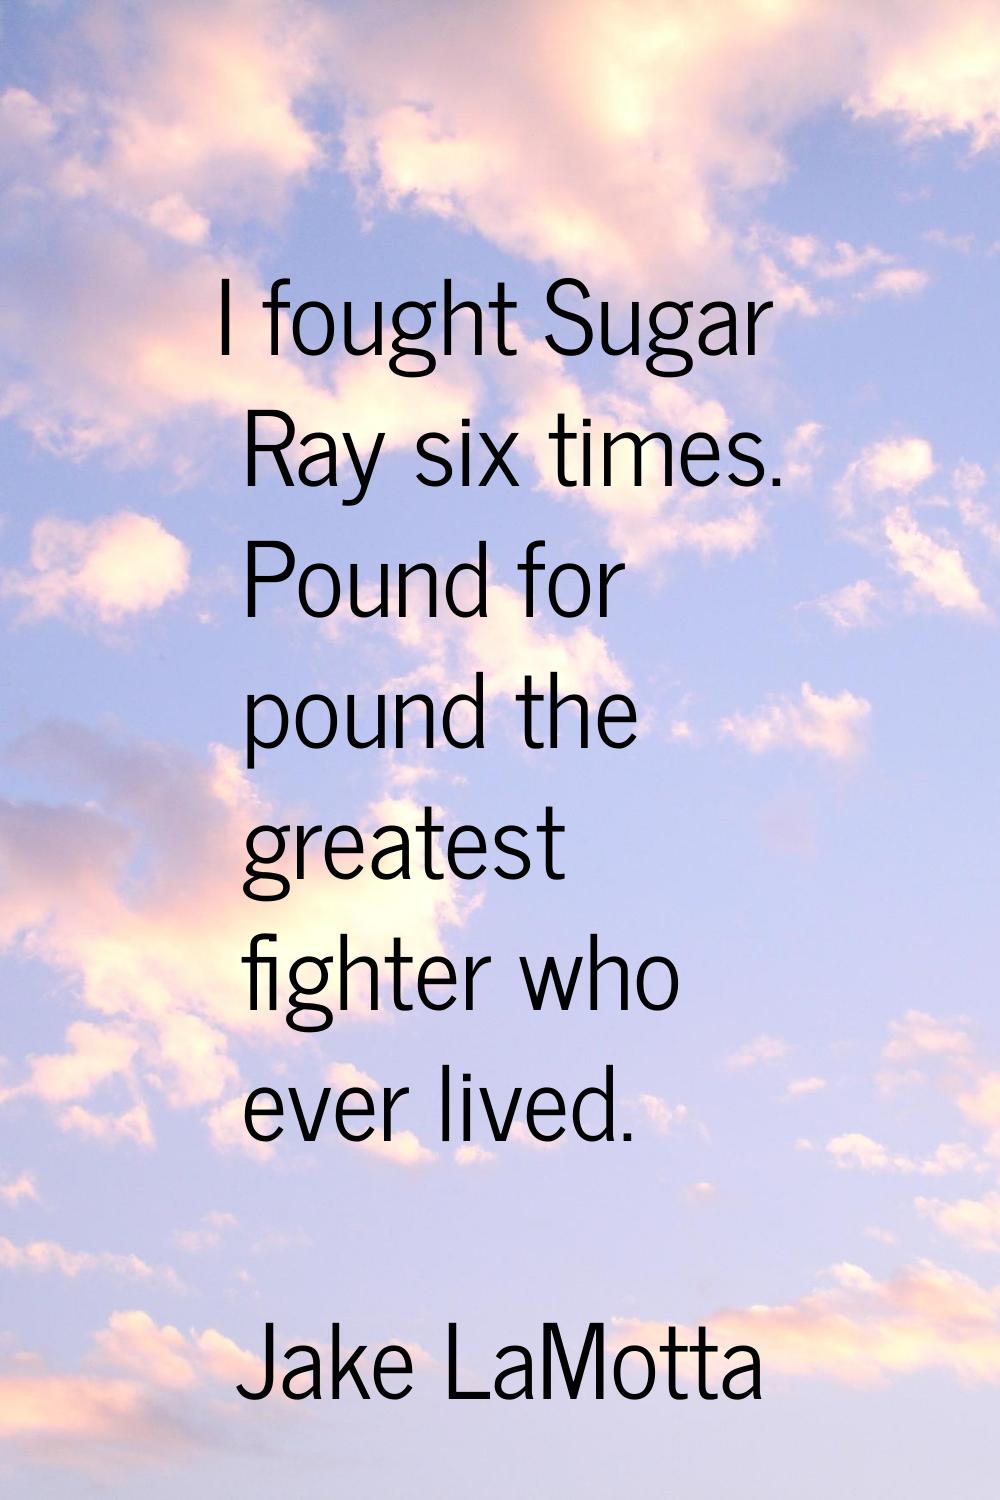 I fought Sugar Ray six times. Pound for pound the greatest fighter who ever lived.